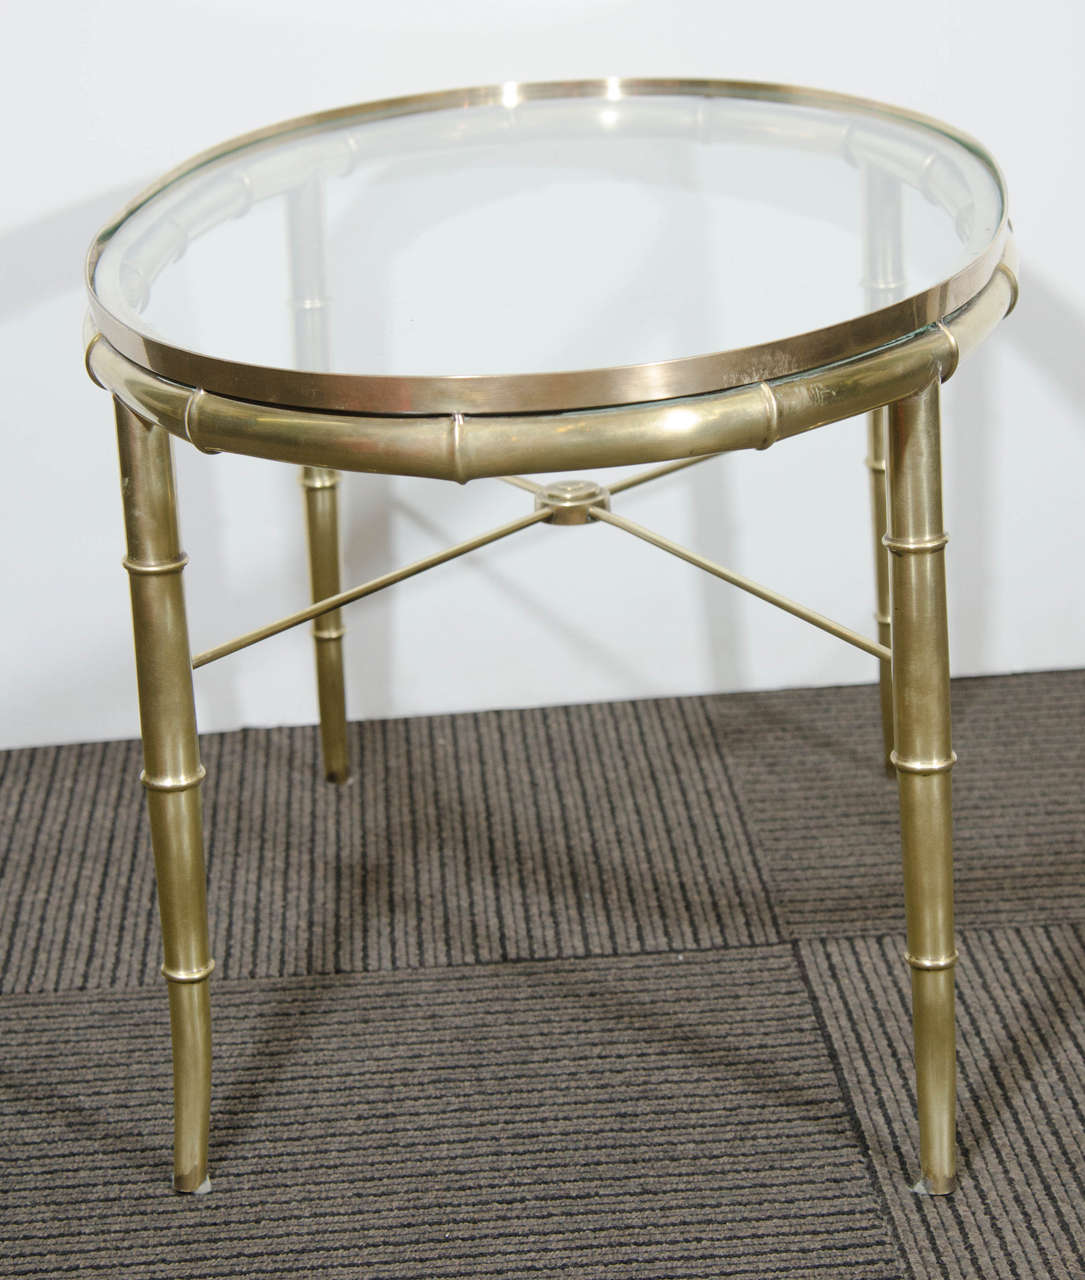 20th Century Midcentury Oval Brass and Glass Tea Table/Occasional Table by Mastercraft